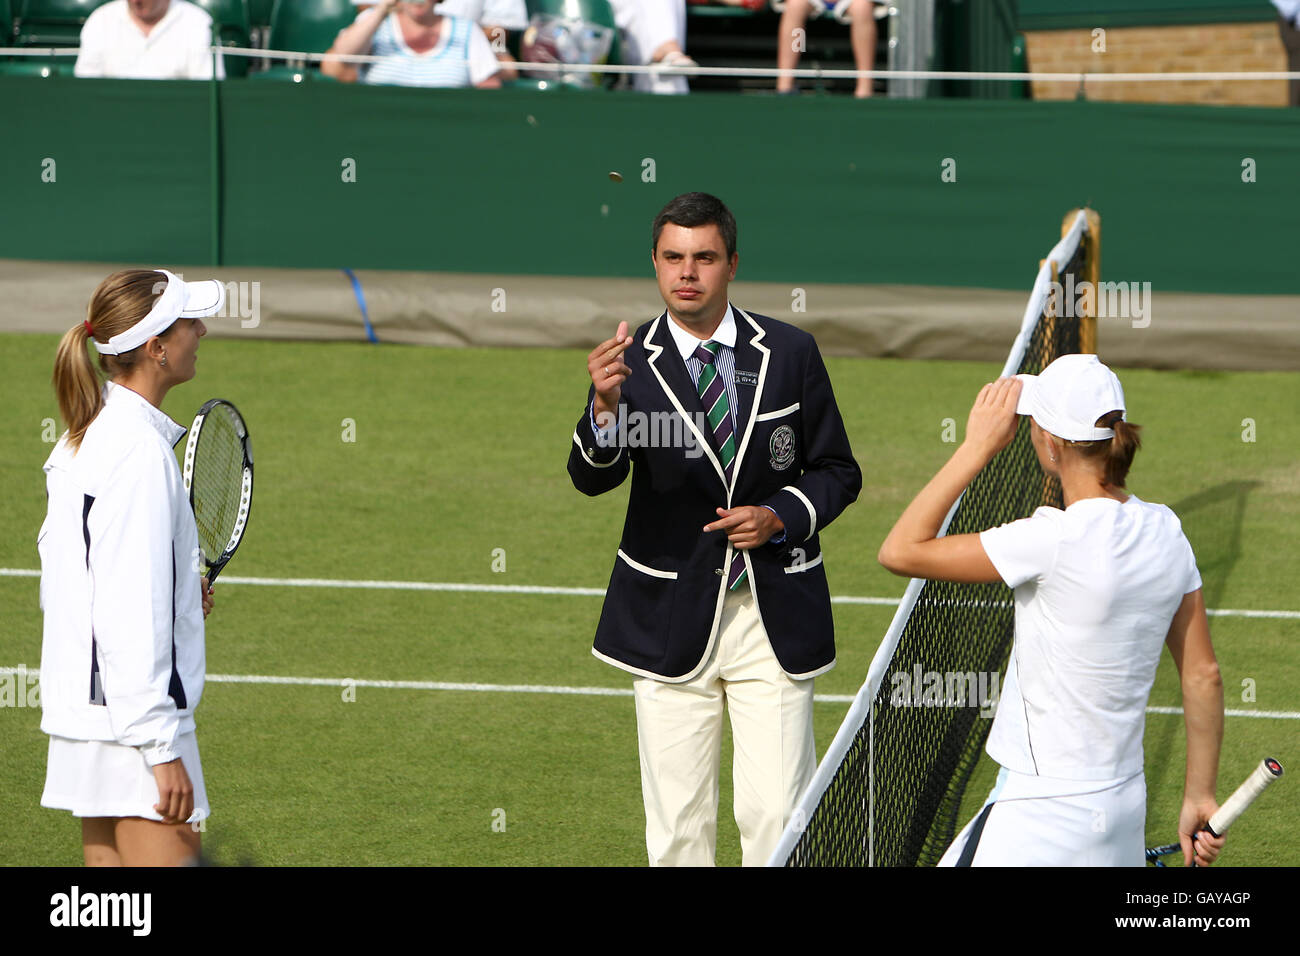 The Match umpire tosses the coin in the air at the start of the match between Maret Ani and Mara Santangelo Stock Photo